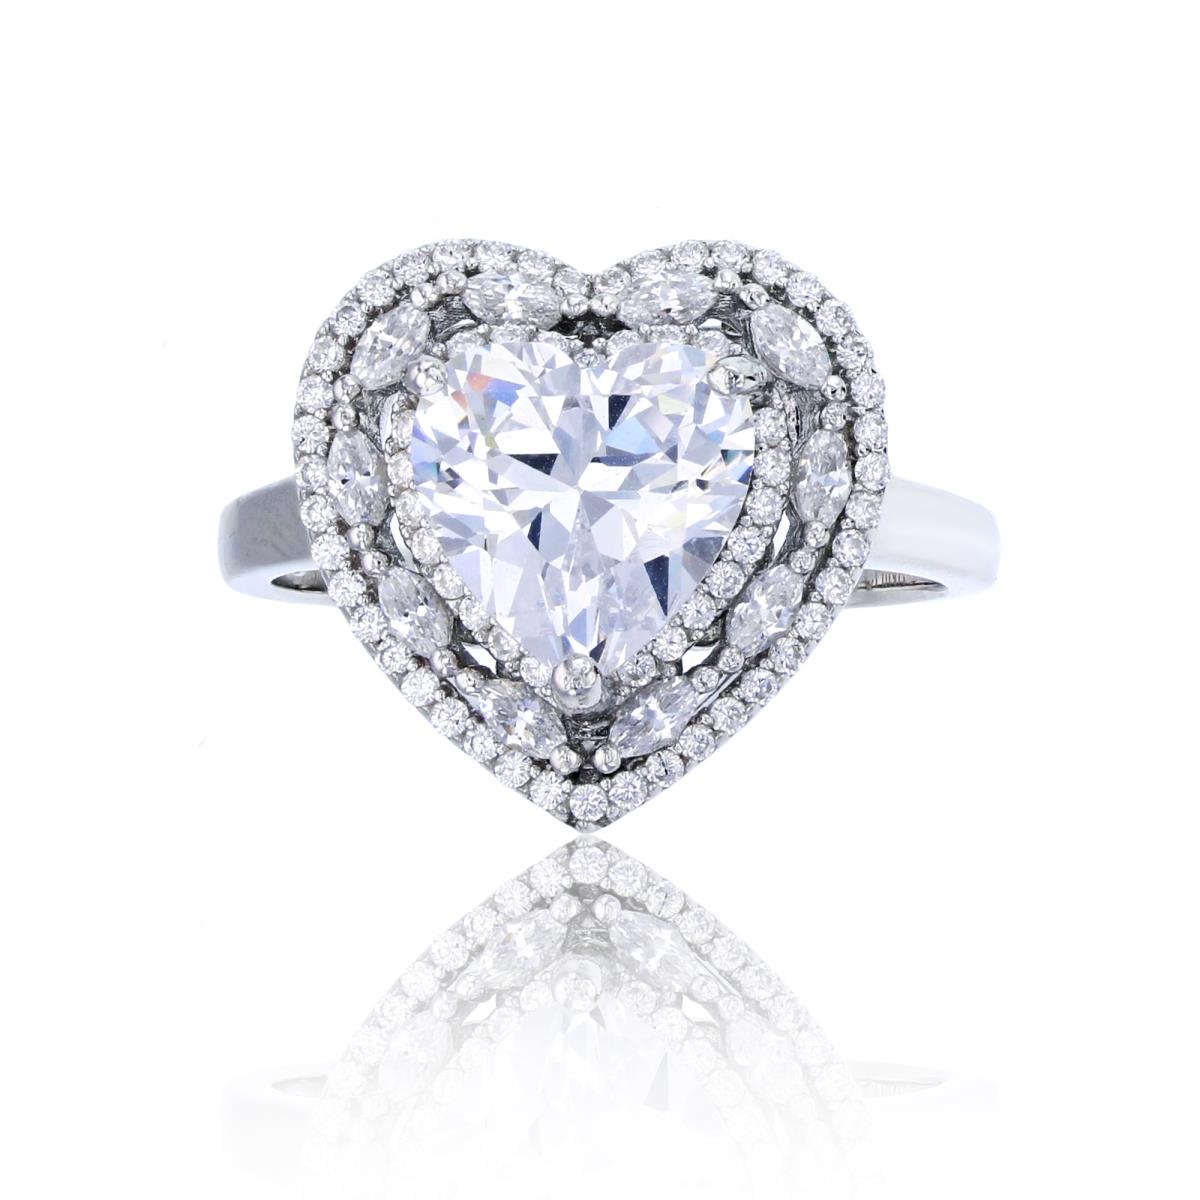 Sterling Silver Rhd 9mm Heart Cut Micropave Rd & Marquise CZ Frame 16mm Fashion Ring